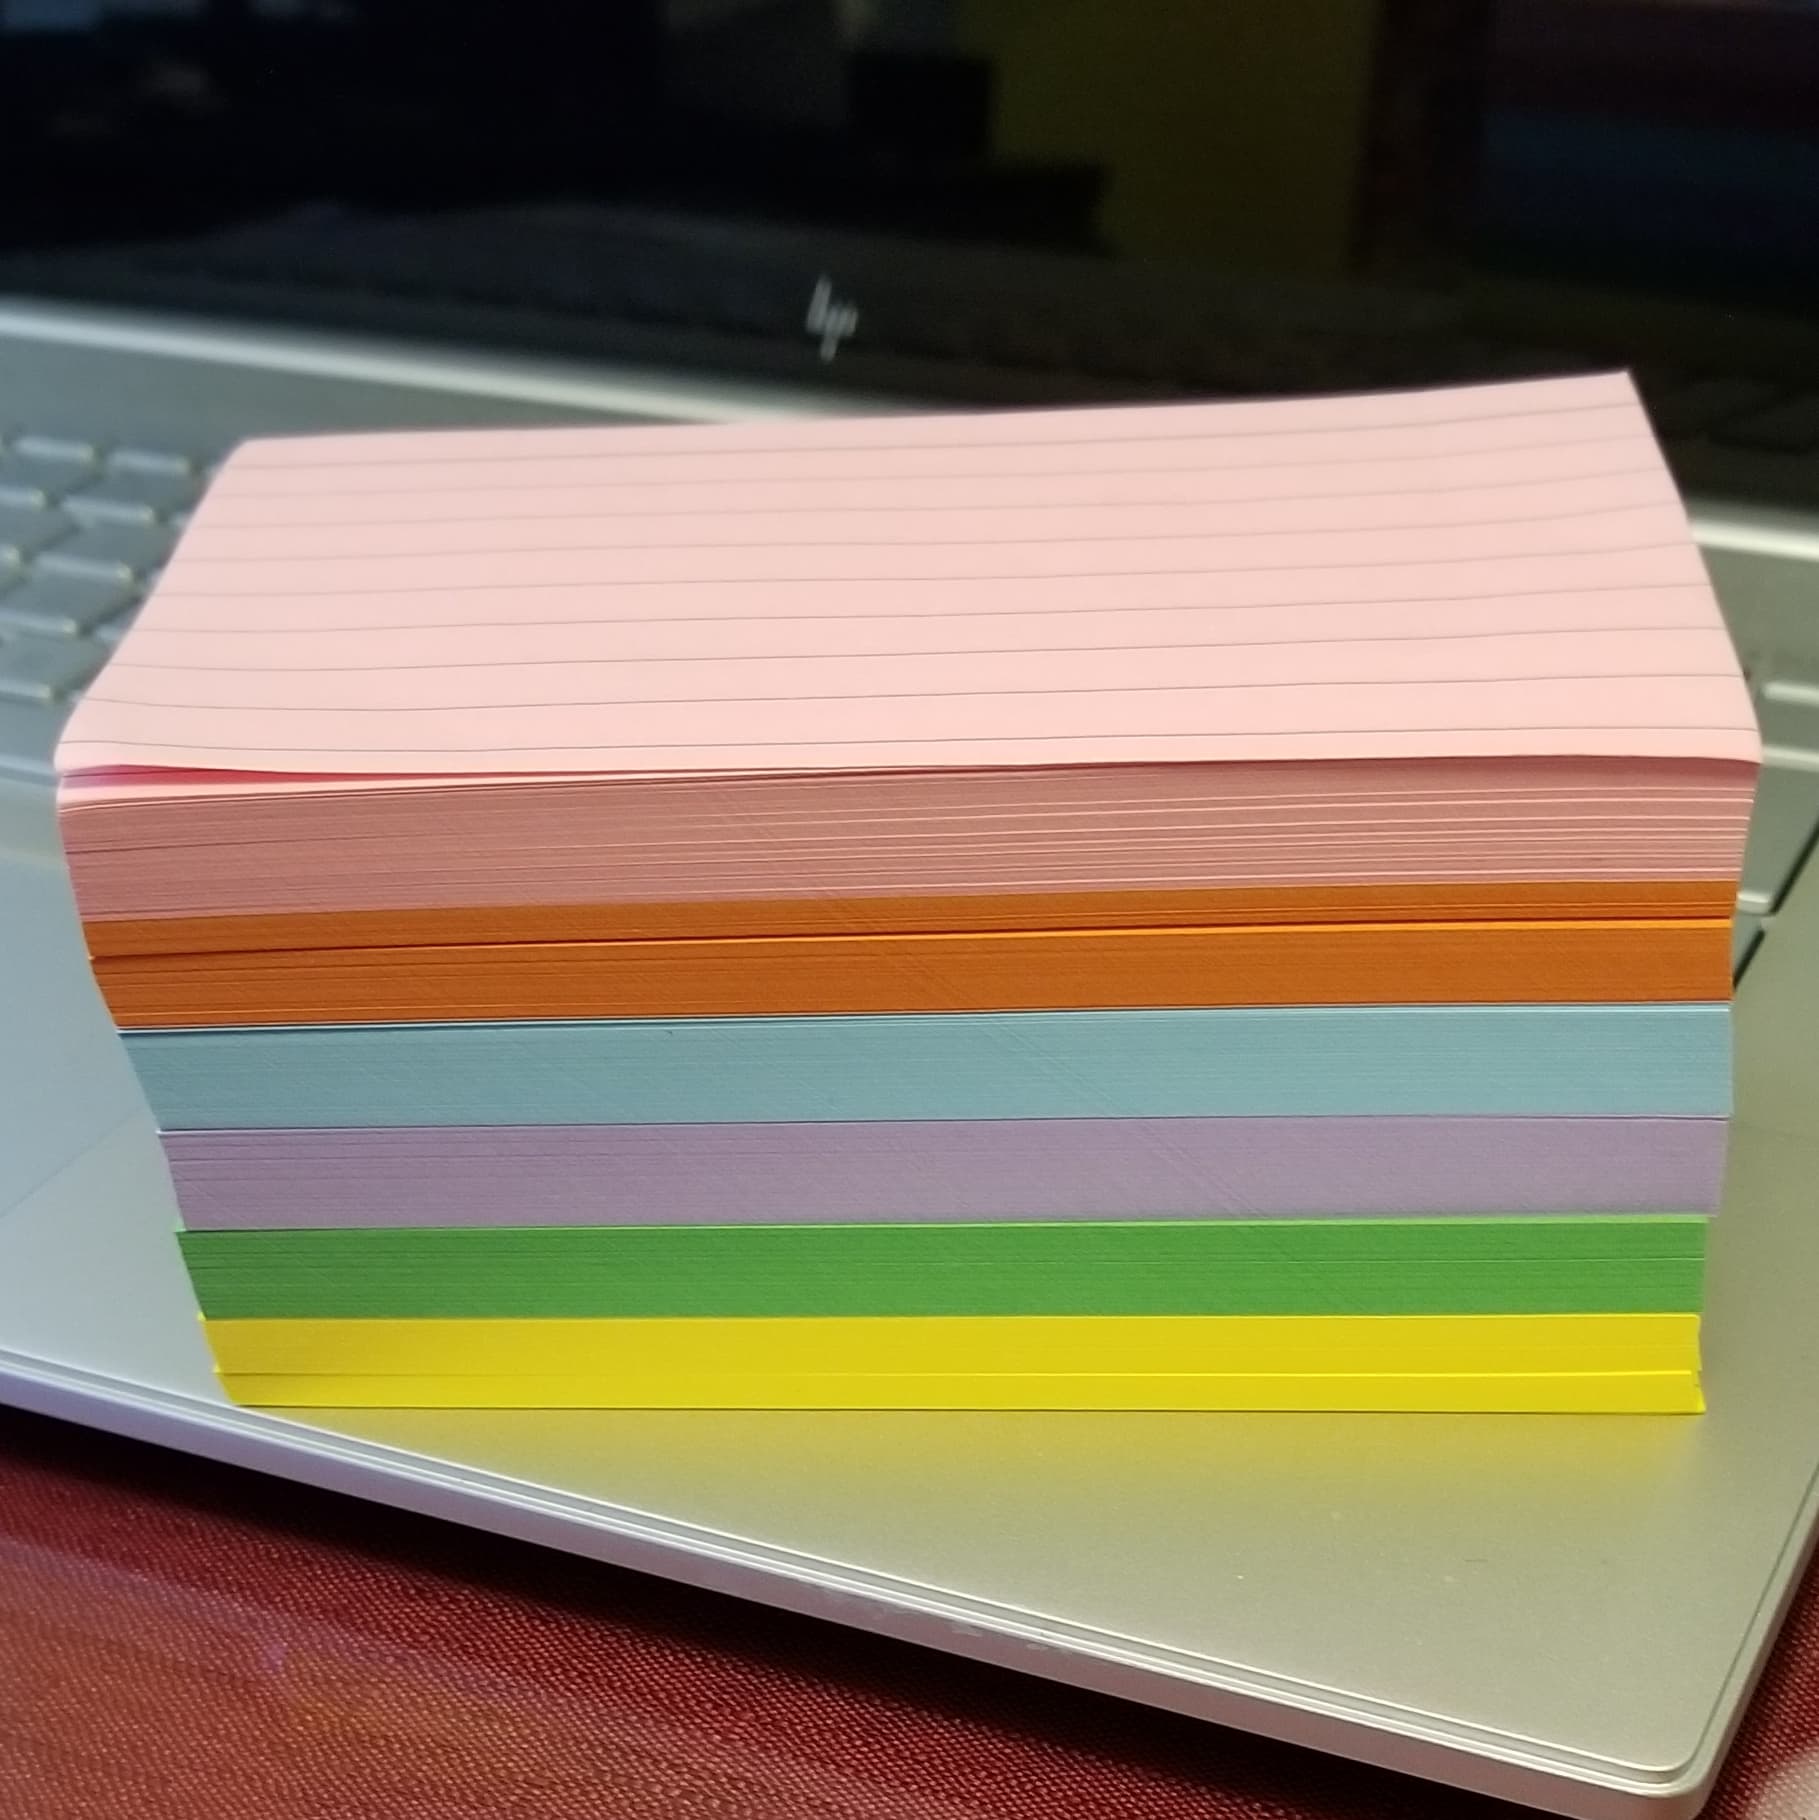 3" X 5" sheets of paper - not index cards